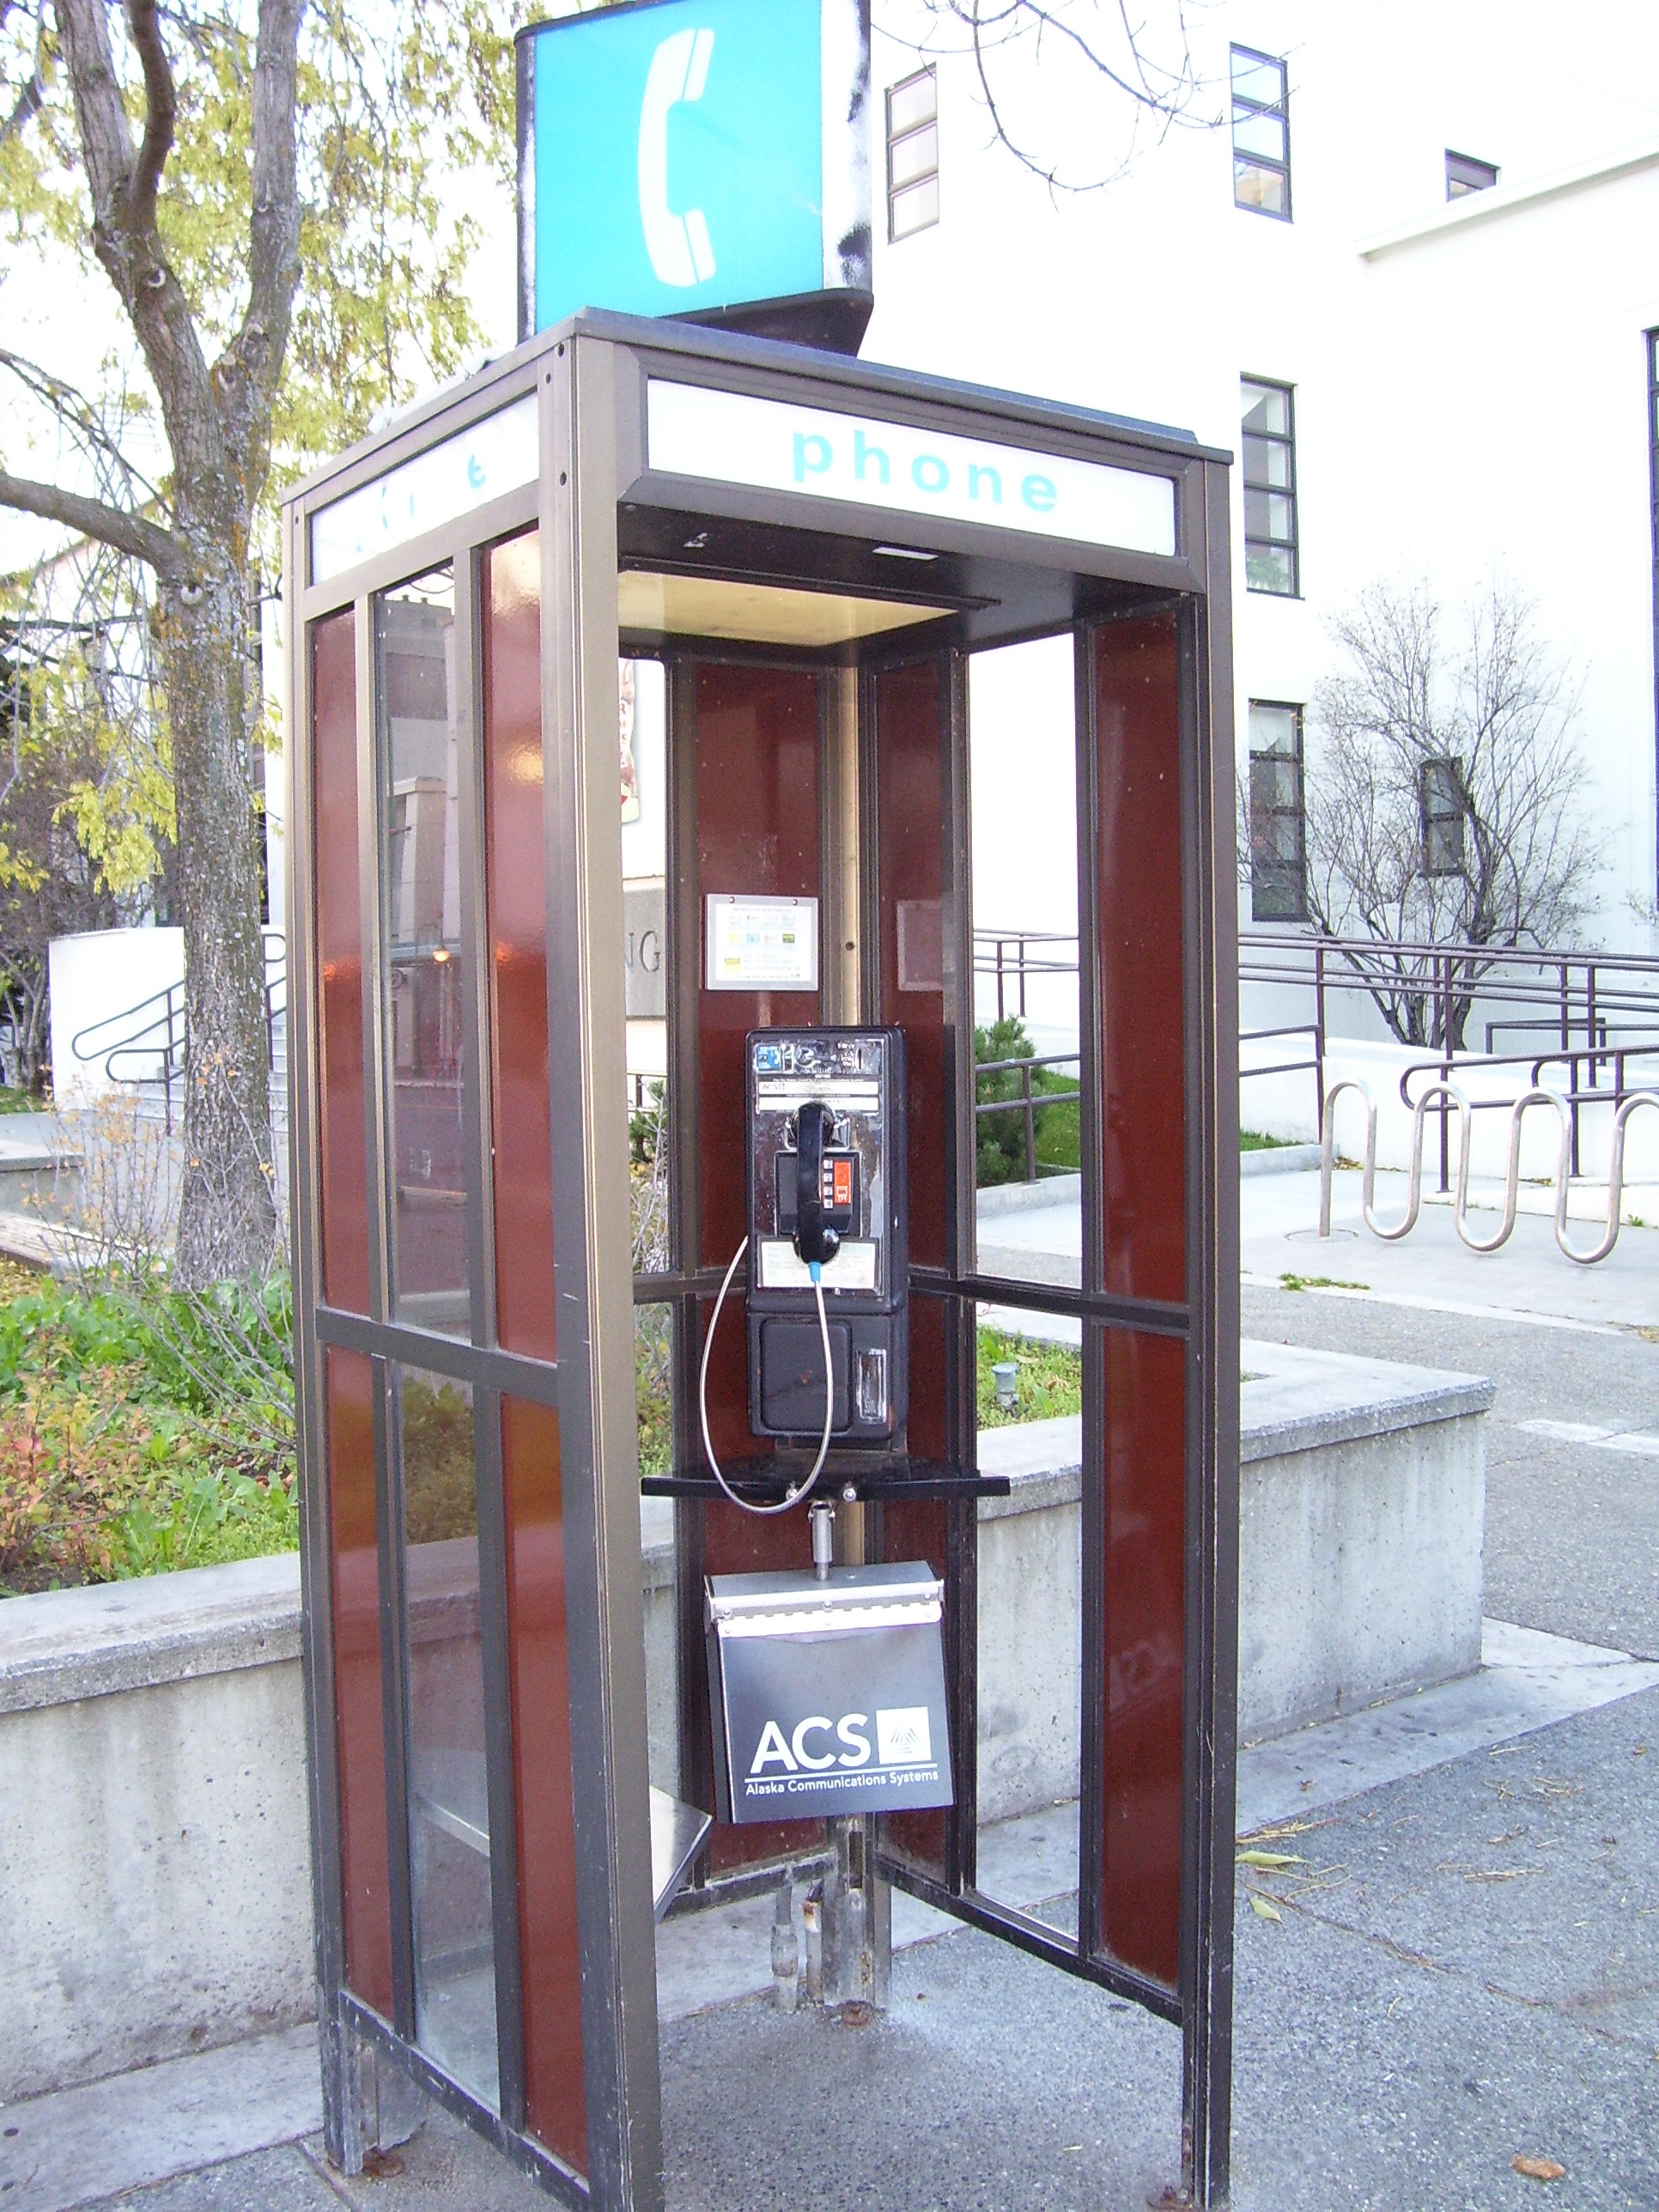 File:Phone booth Anchorage 2006.jpg - Wikimedia Commons